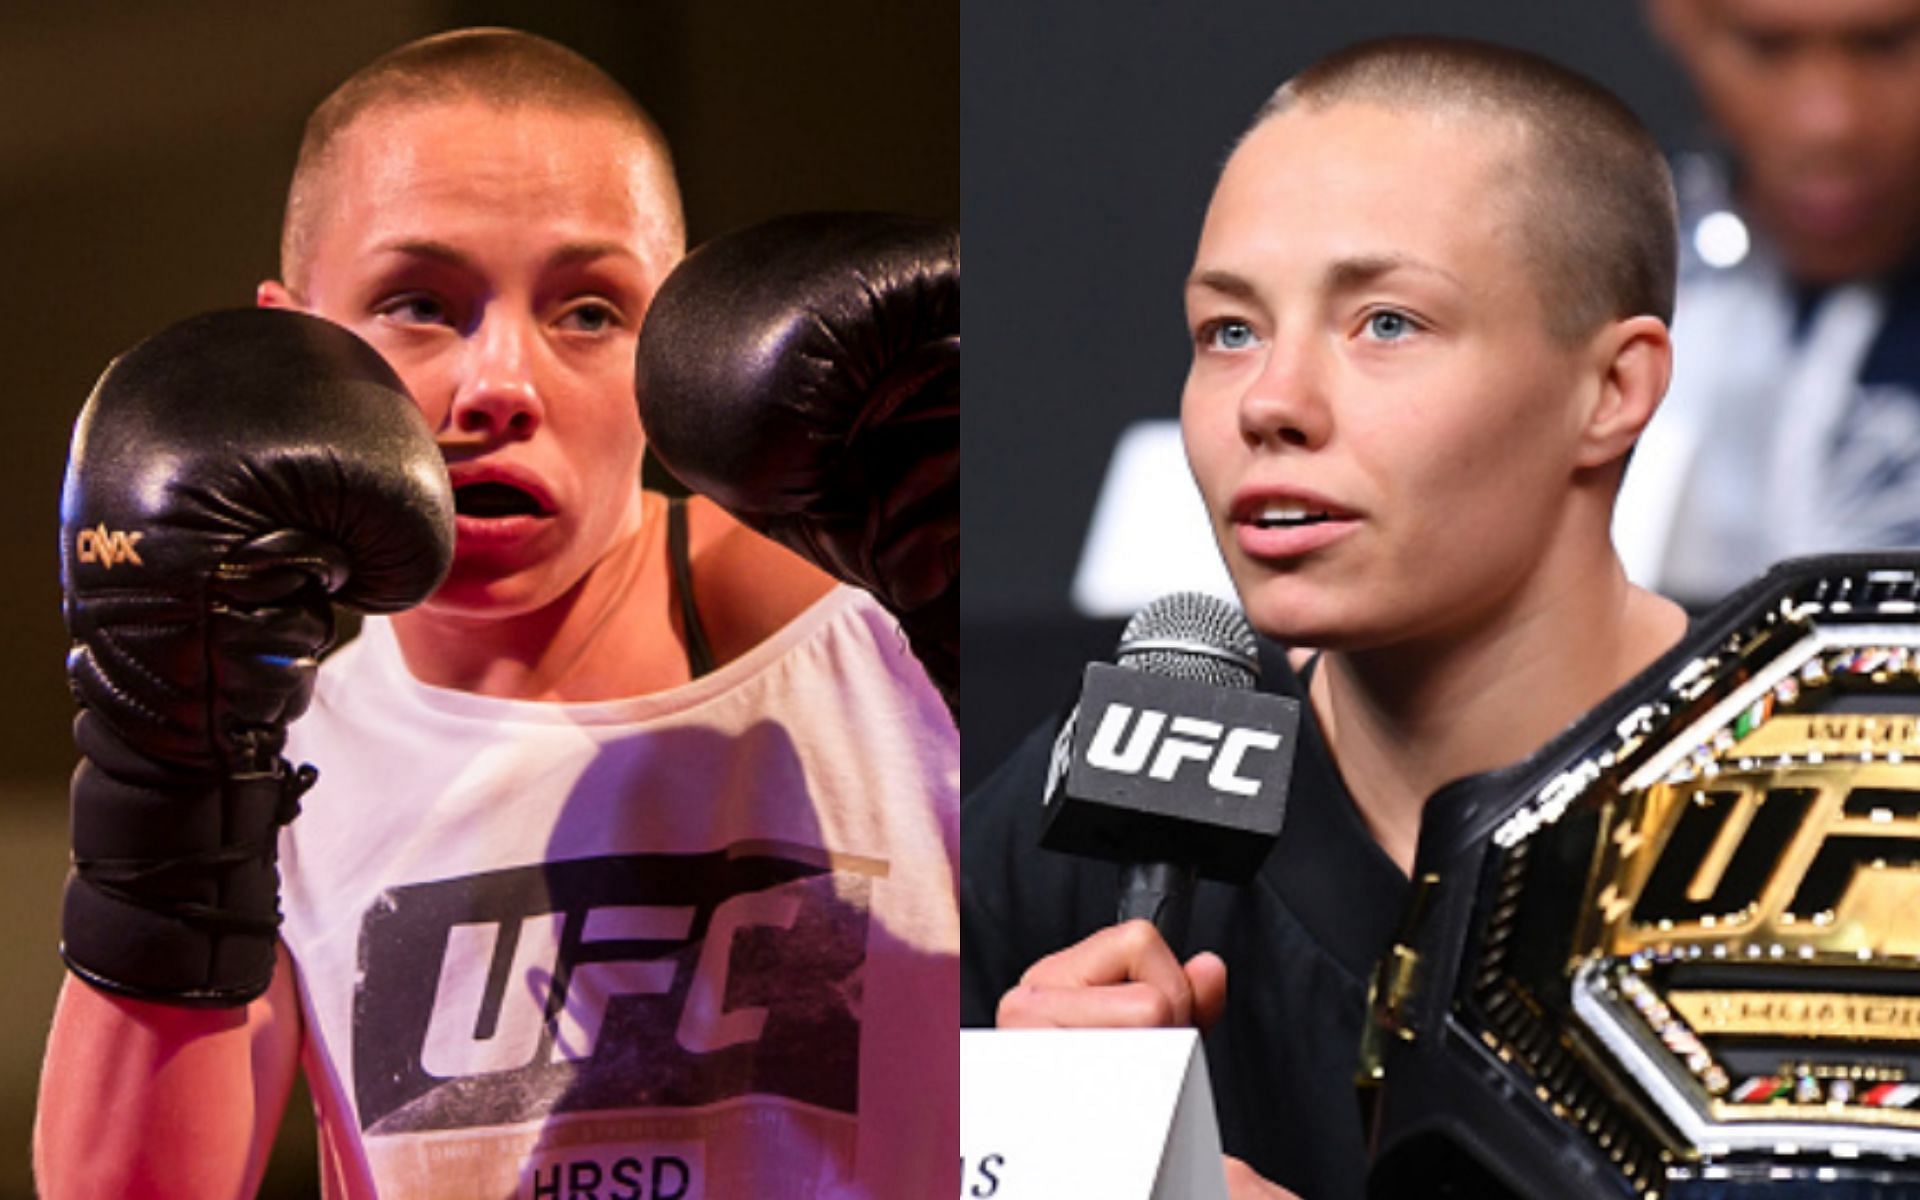 Rose Namajunas is heralded amongst the most skilled strikers in all of MMA today